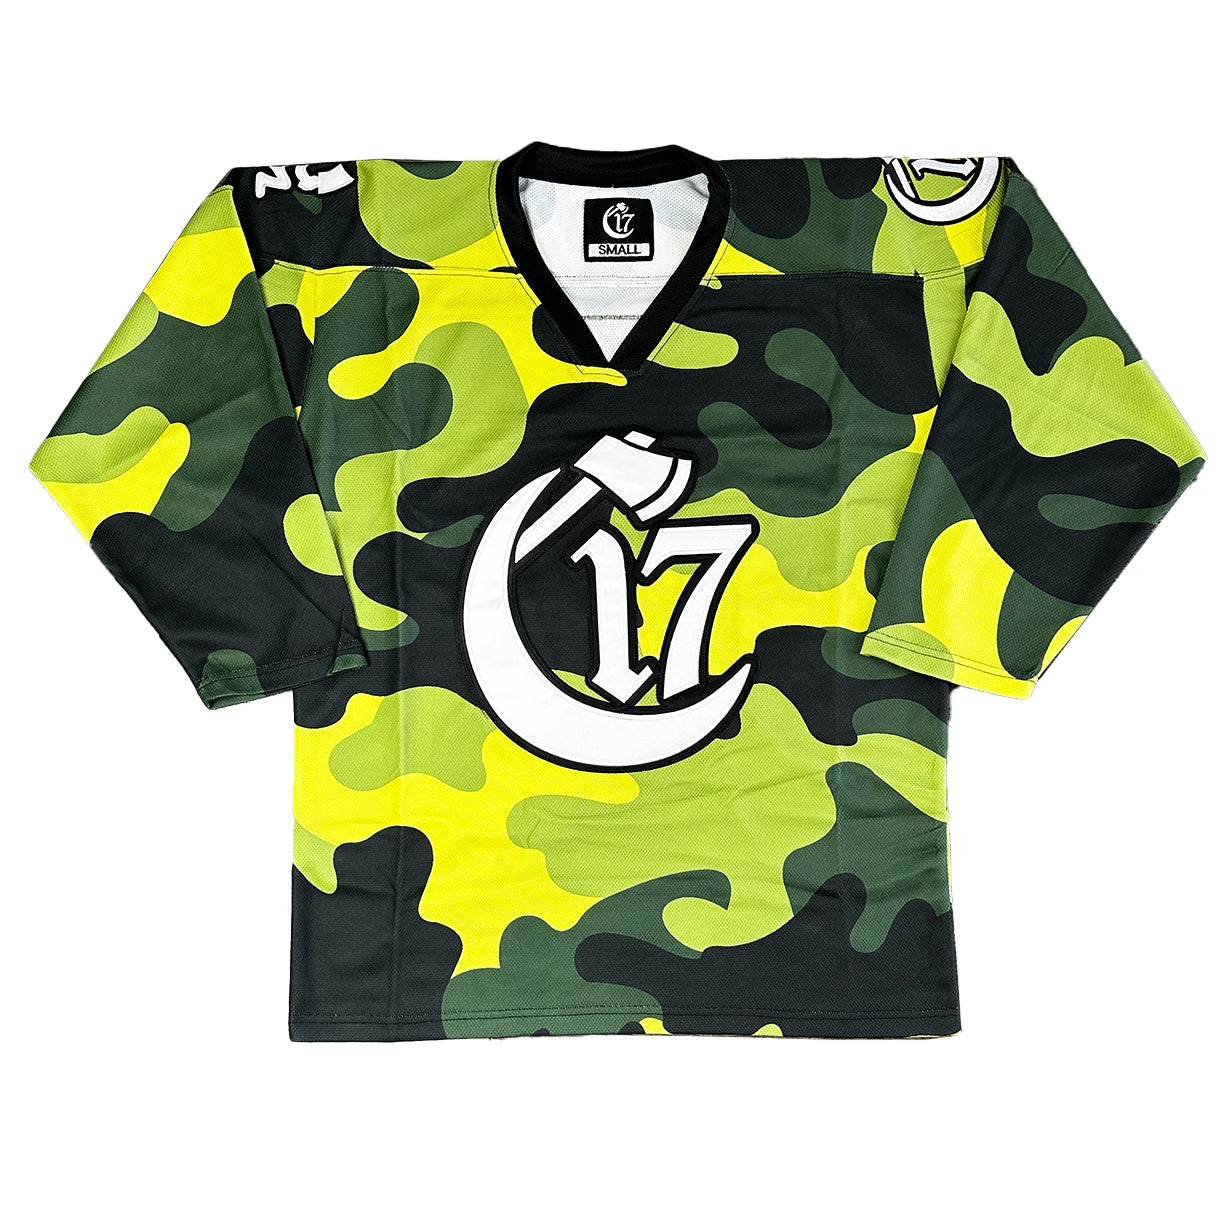 Official Chapter 17 jersey - Camo